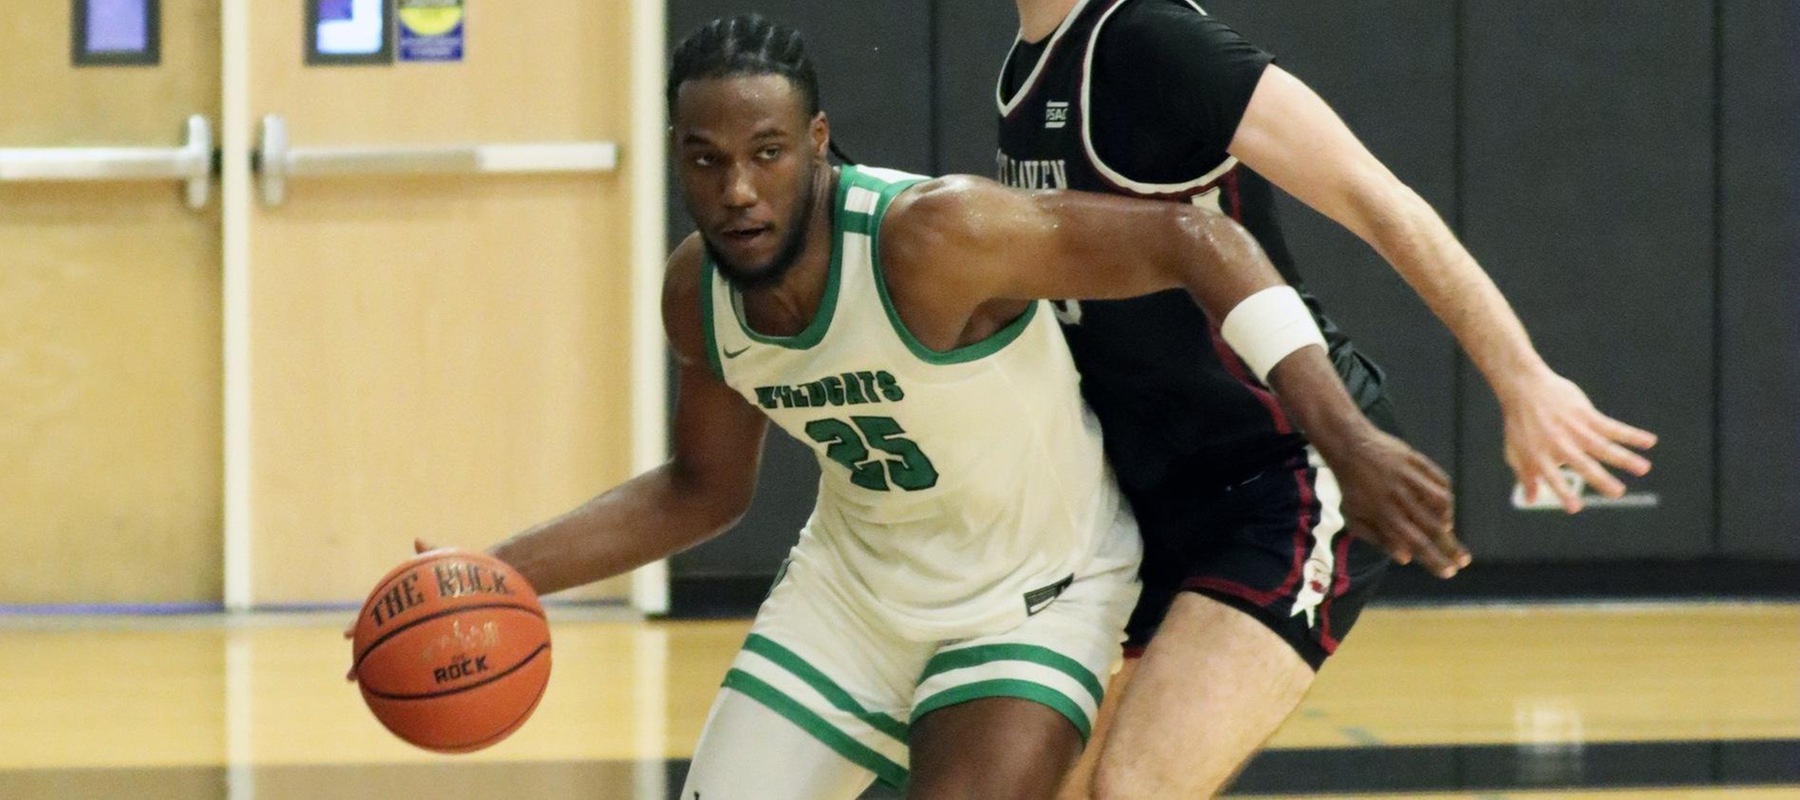 File photo of Nalik Veasely who had 11 points, 9 rebounds, and 7 blocked shots at UDC on Monday. Copyright 2023; Wilmington University. All rights reserved. Photo by Dan Lauletta. December 9, 2023 vs. Lock Haven.